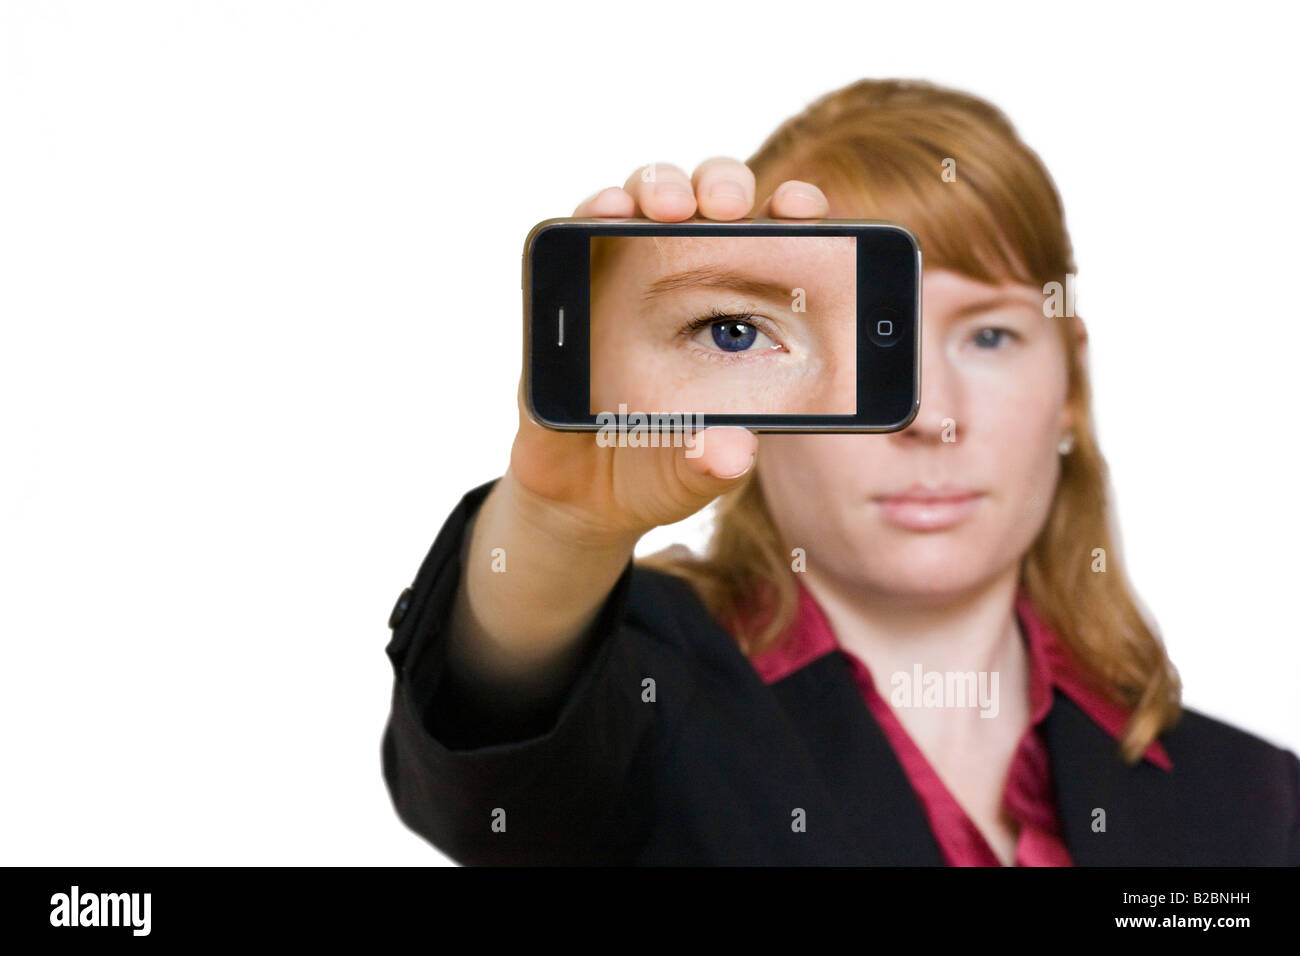 A female model in business attire displays an Apple 3G iPhone Stock Photo